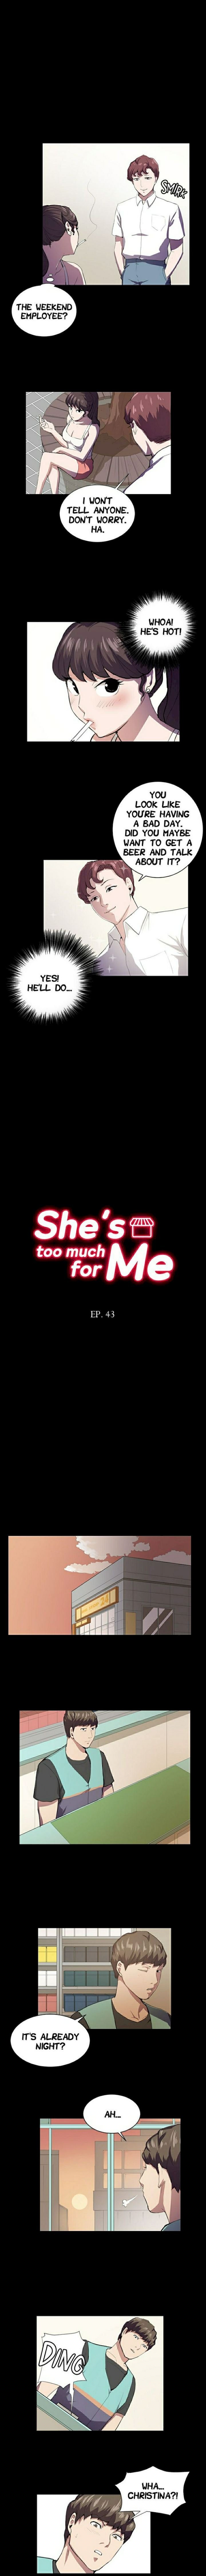 she8217s-too-much-for-me-chap-43-0